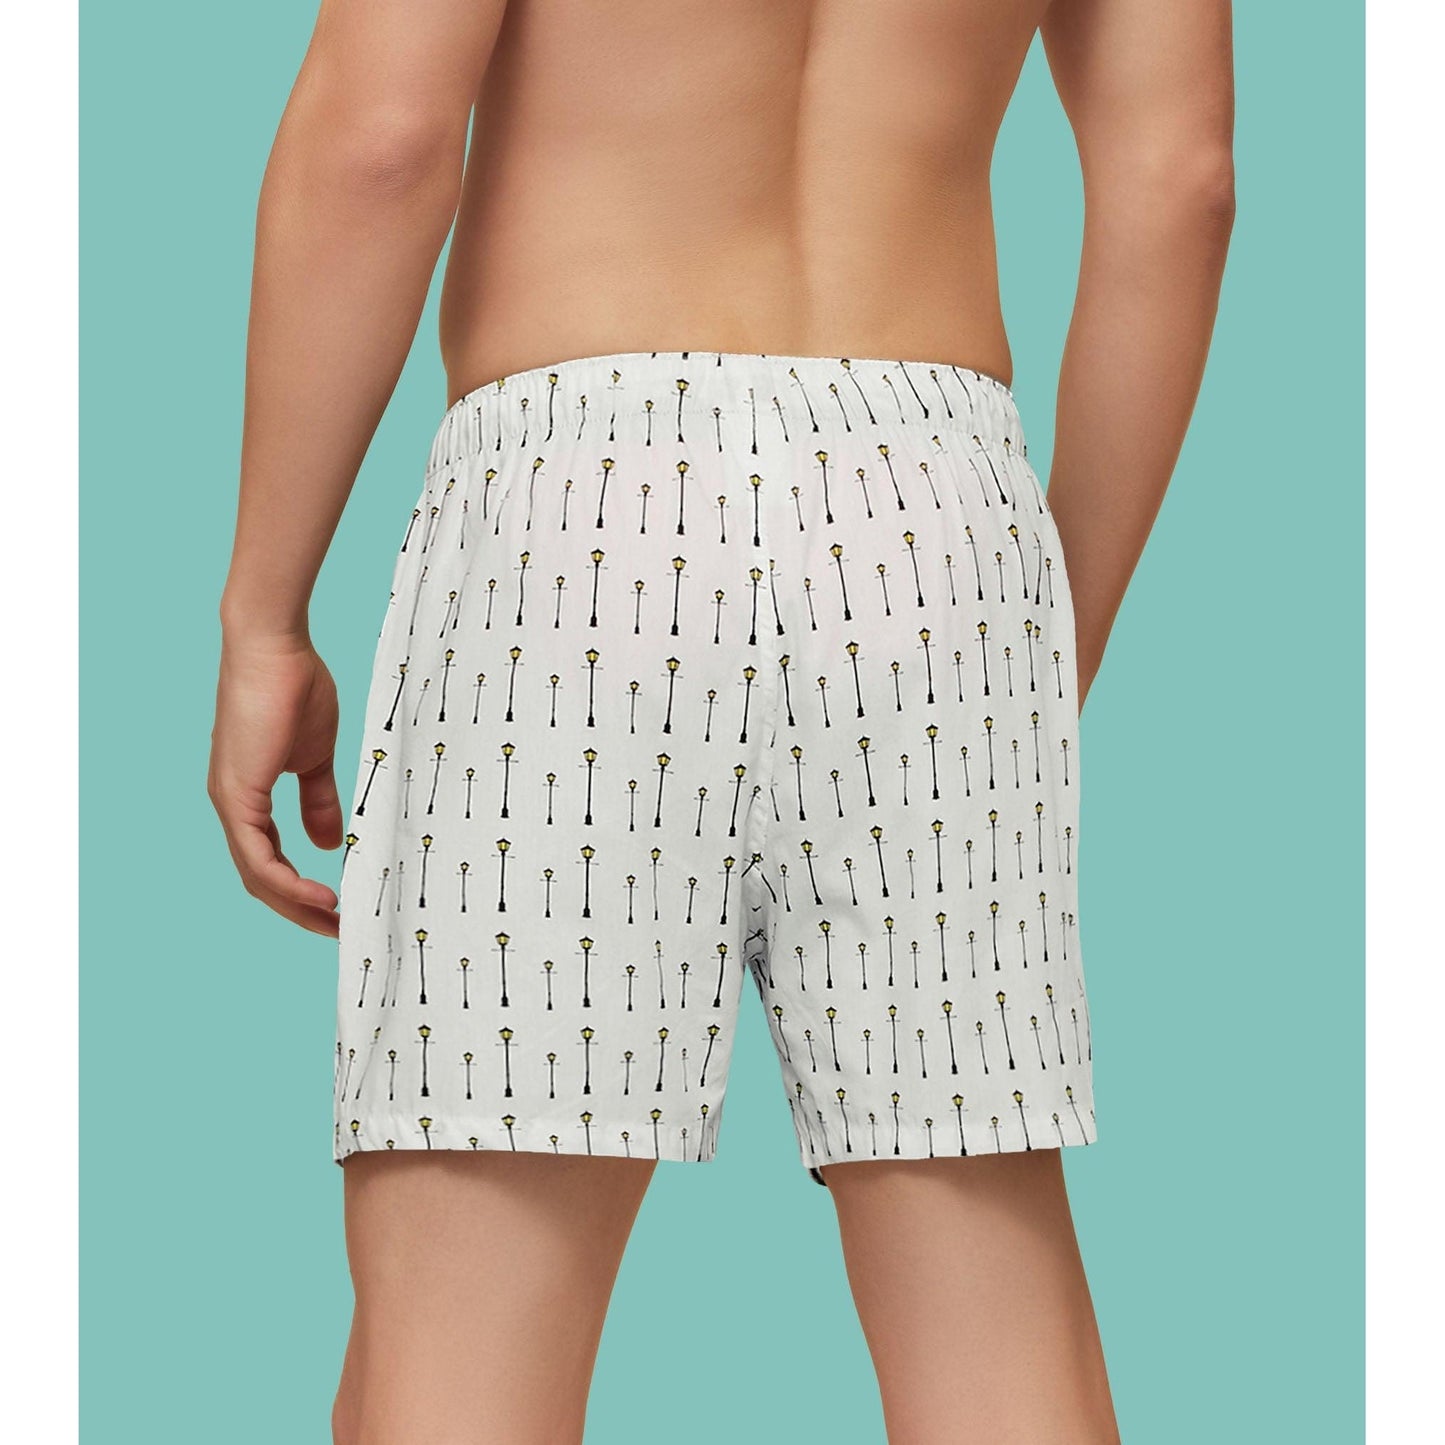 PACK OF 2 SUPER COMBED COTTON BOXER SHORTS: ALMOND / STREET LAMP